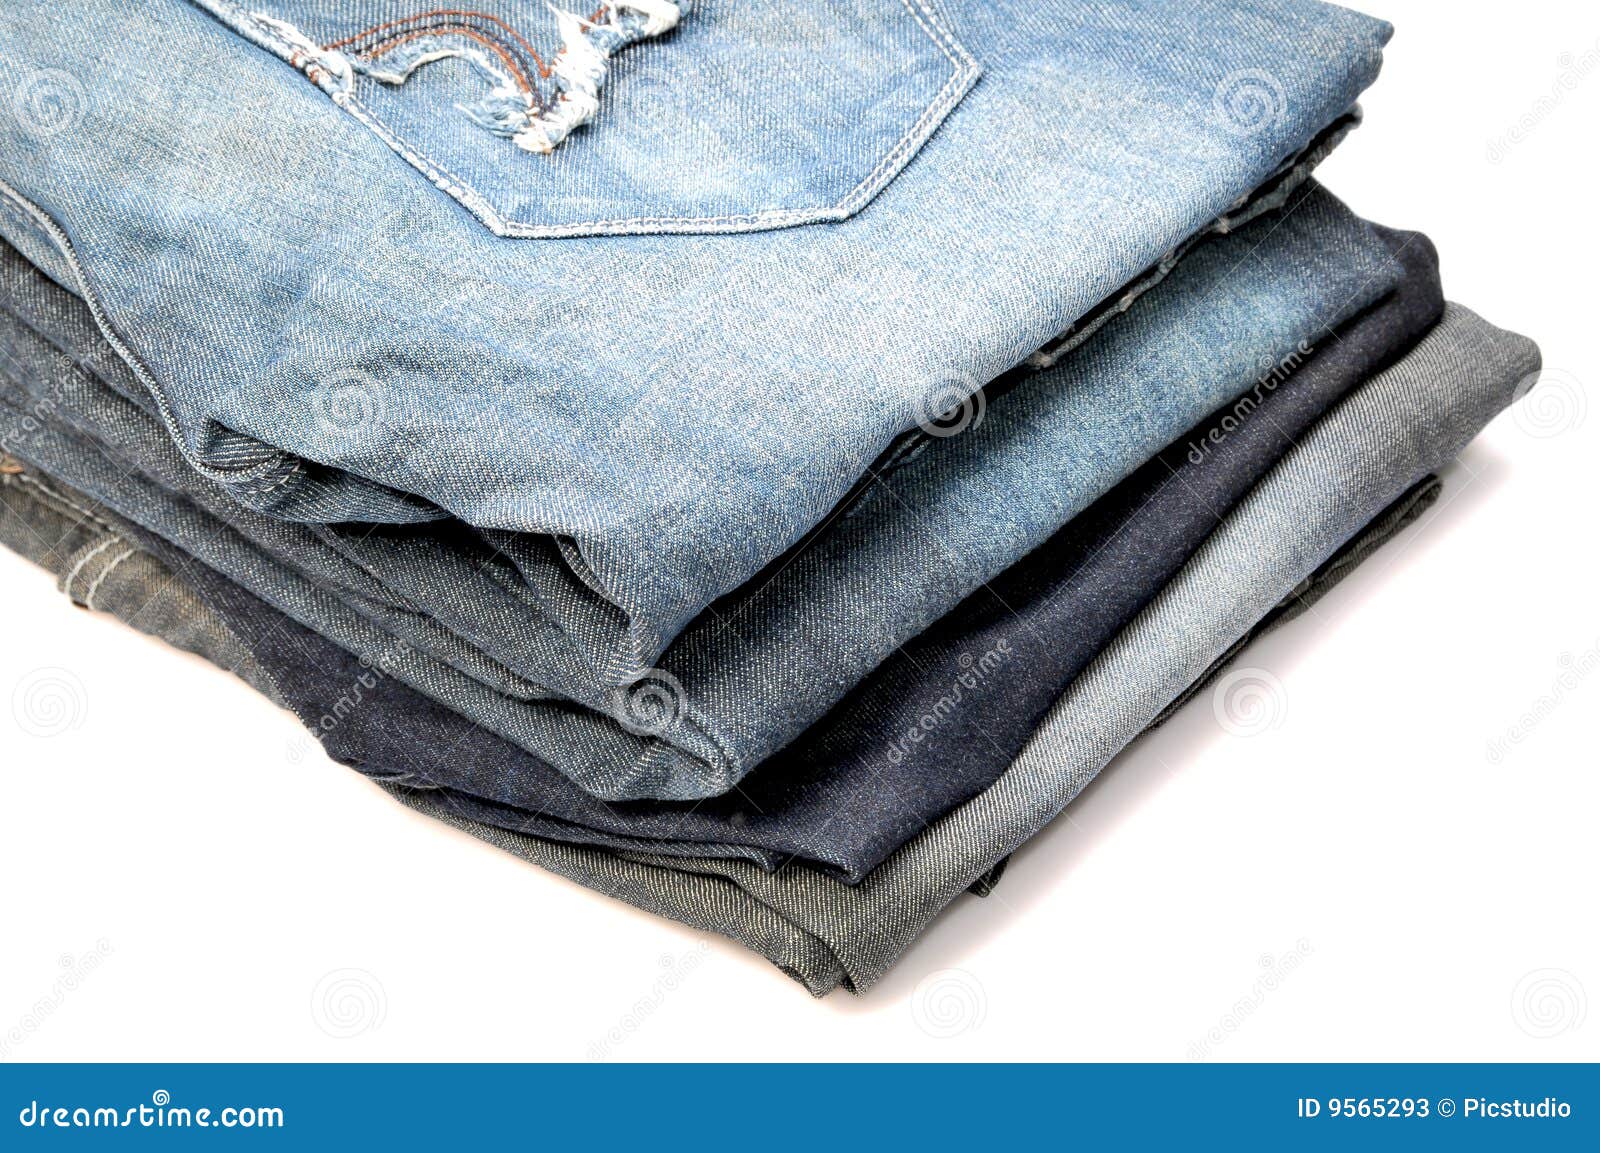 Pile of jeans stock image. Image of fabric, clothes, pocket - 9565293